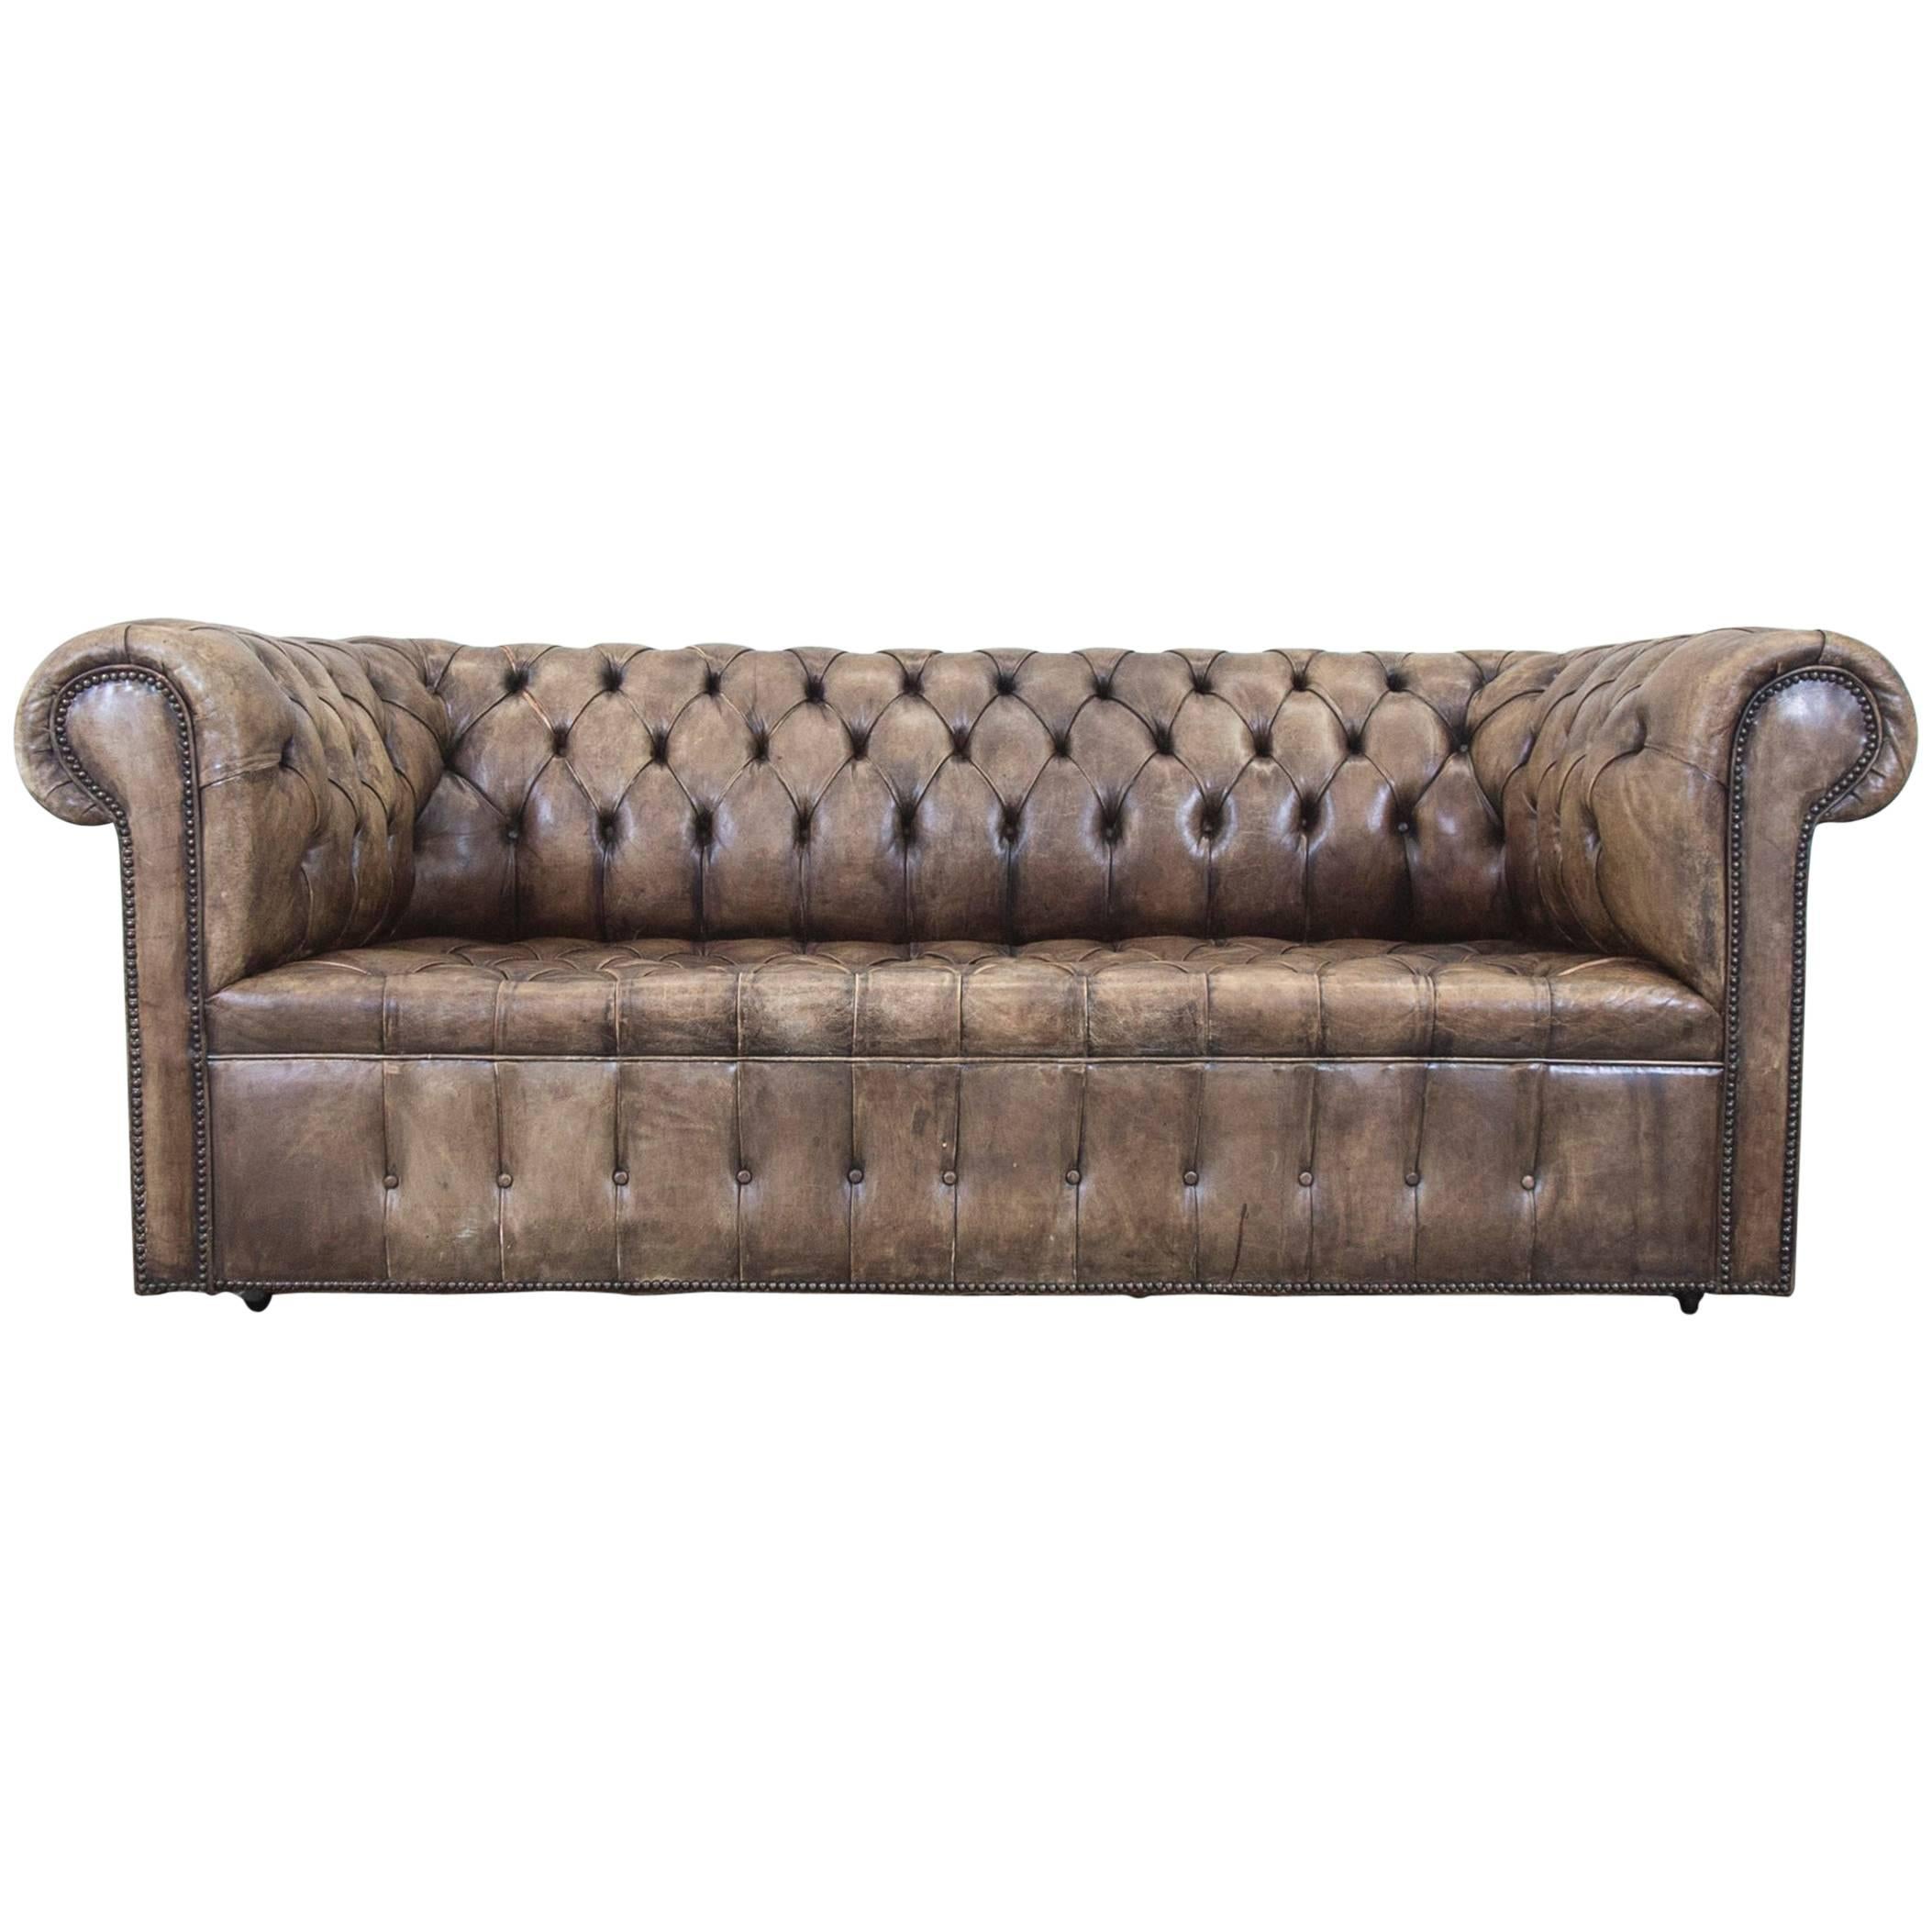 Chesterfield Sofa Brown Beige Leather Three-Seat Couch Vintage Retro For Sale